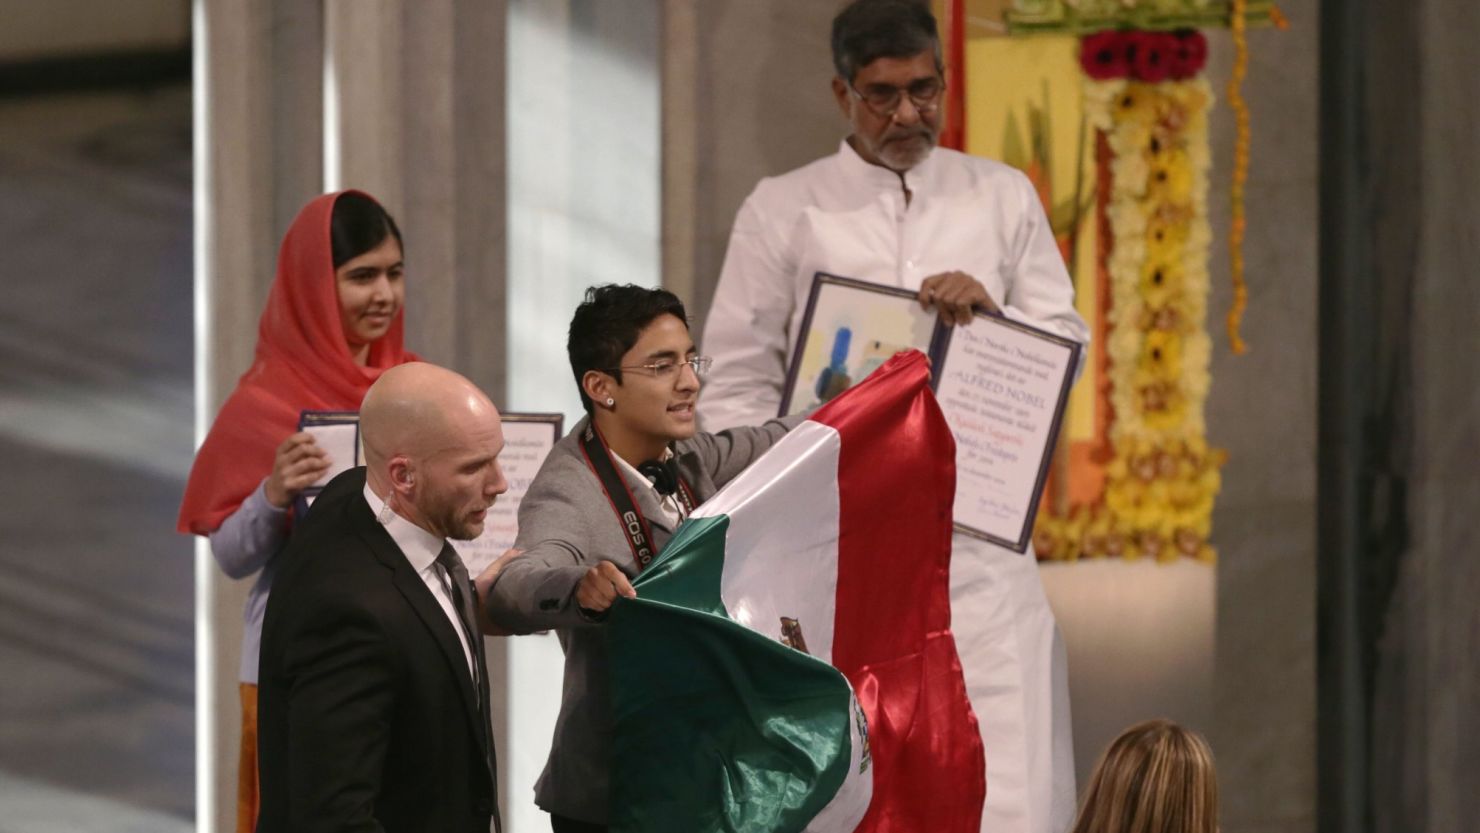 Oslo police say they arrested a Mexican citizen who interrupted the Nobel Peace Prize ceremony Wednesday.